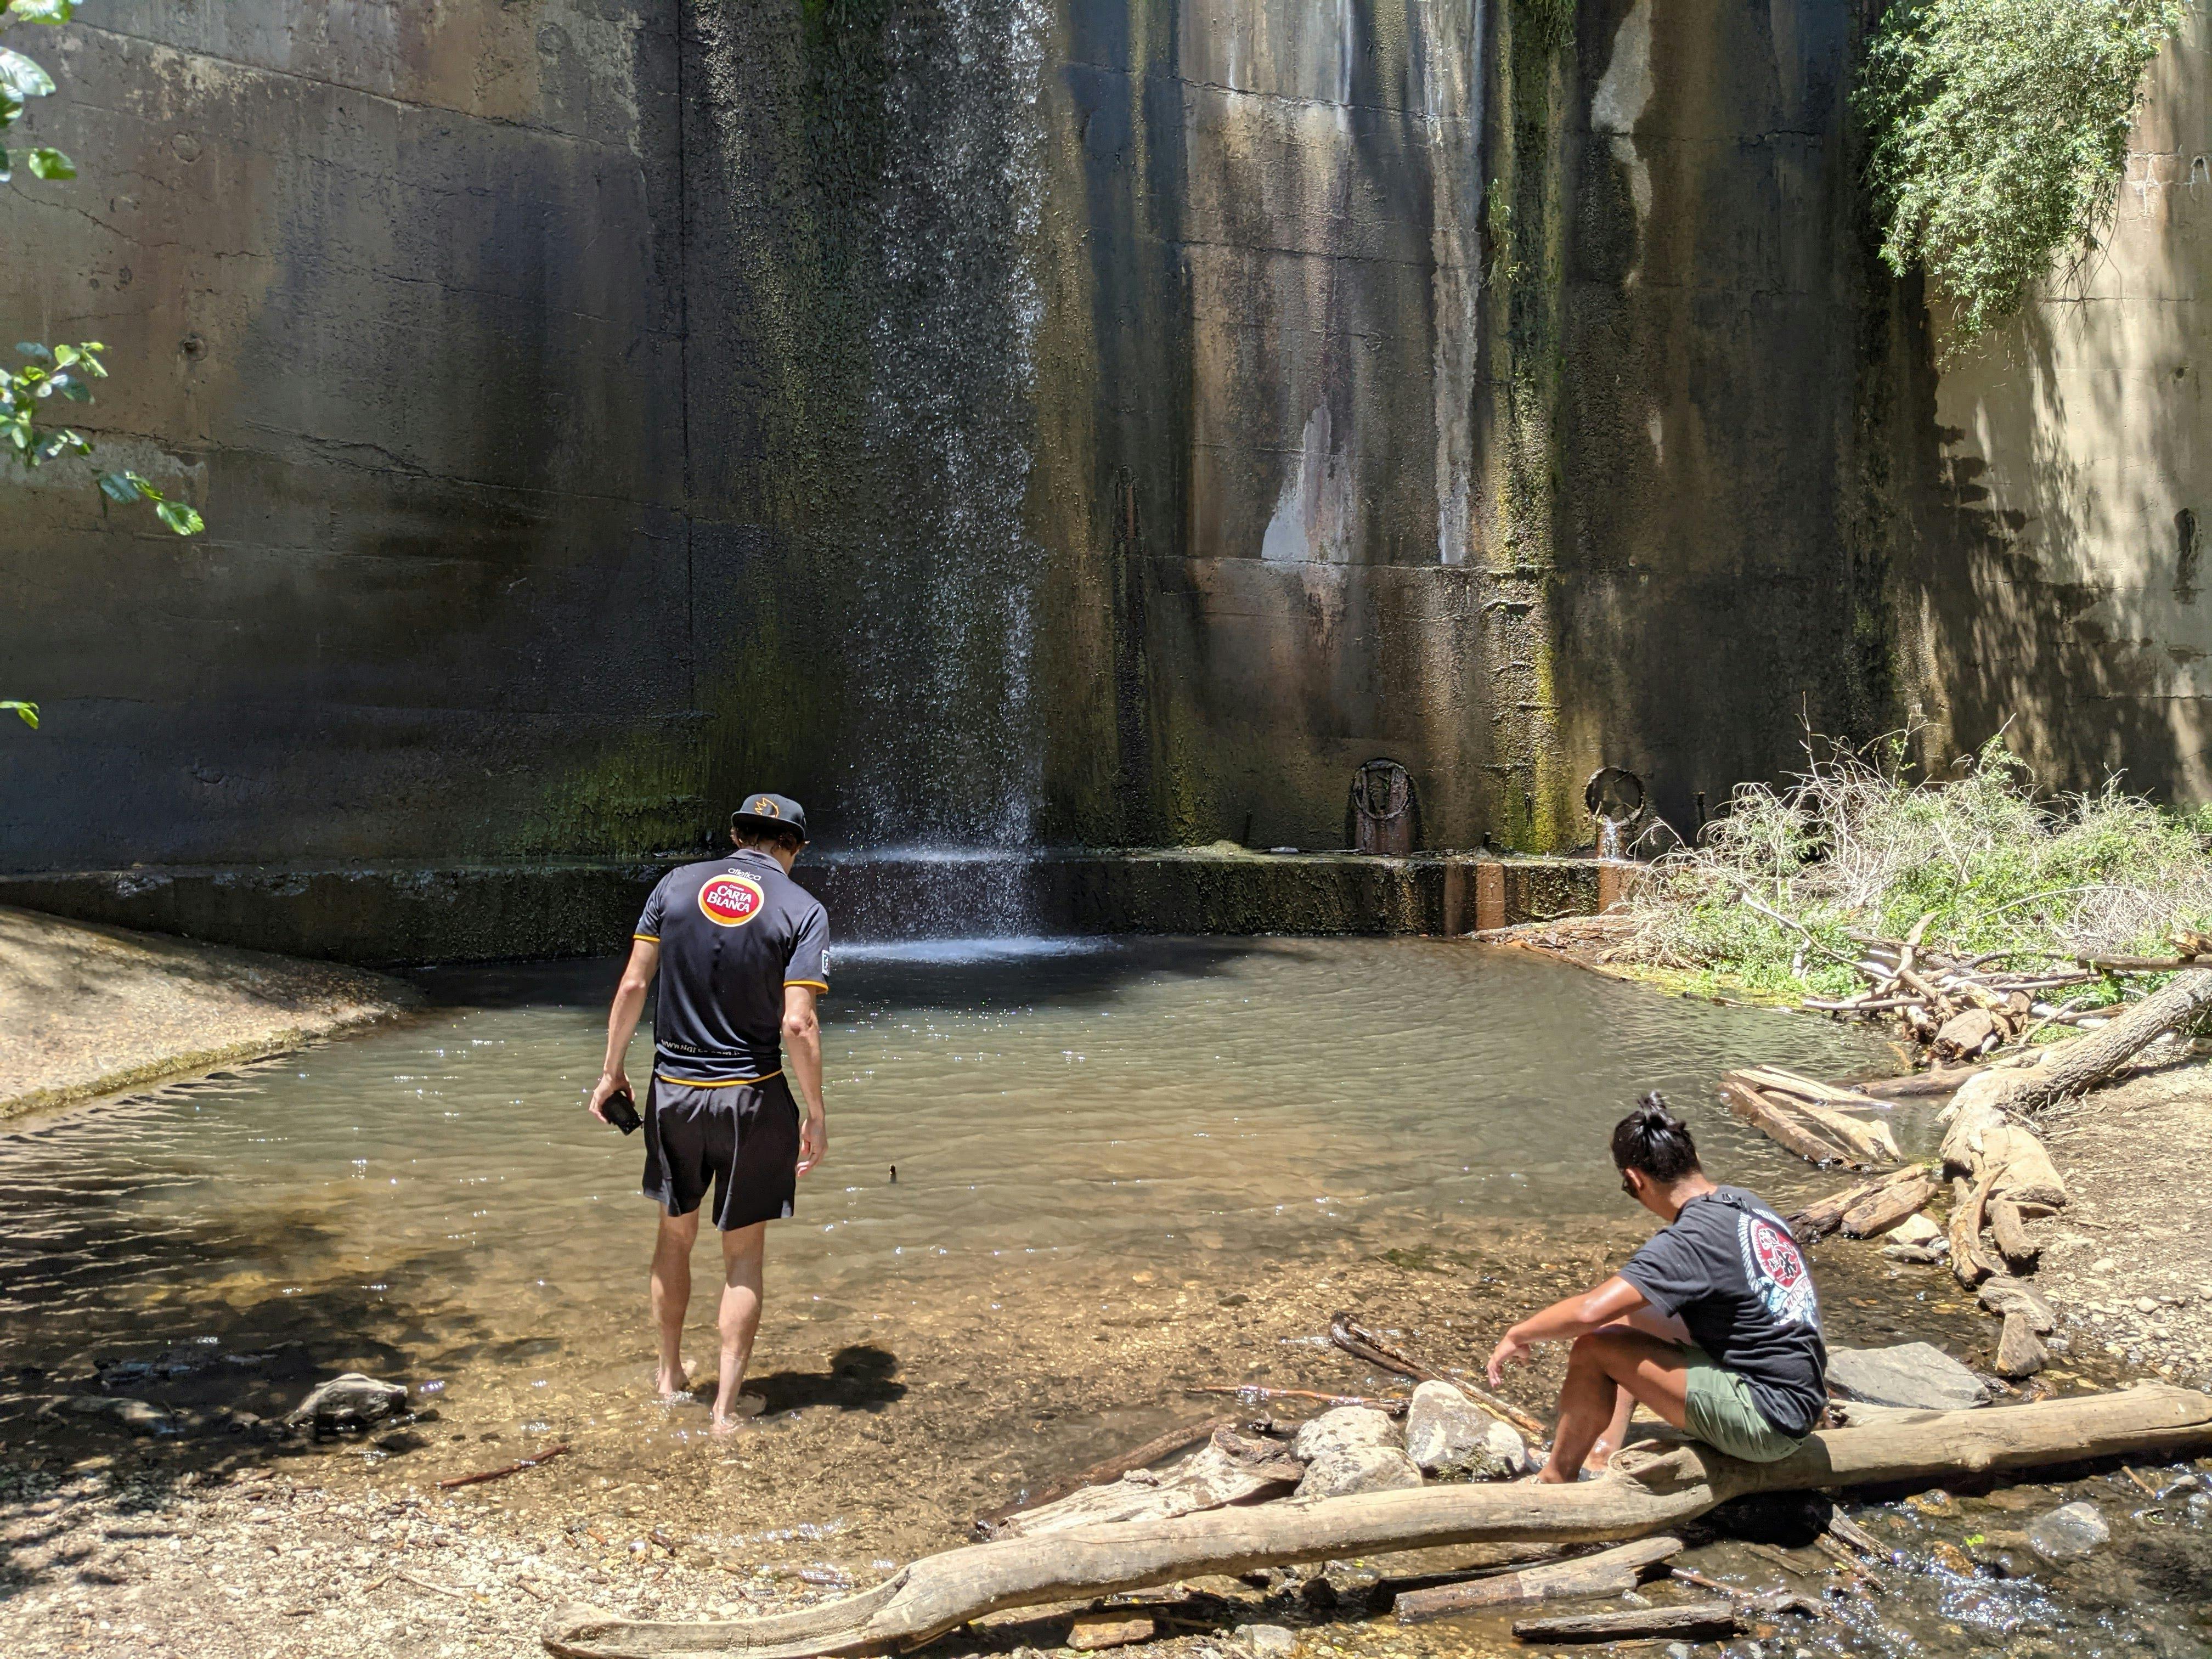 Two people at the water basin of the historic Brown Mountain Dam in Angeles National Forest Southern California